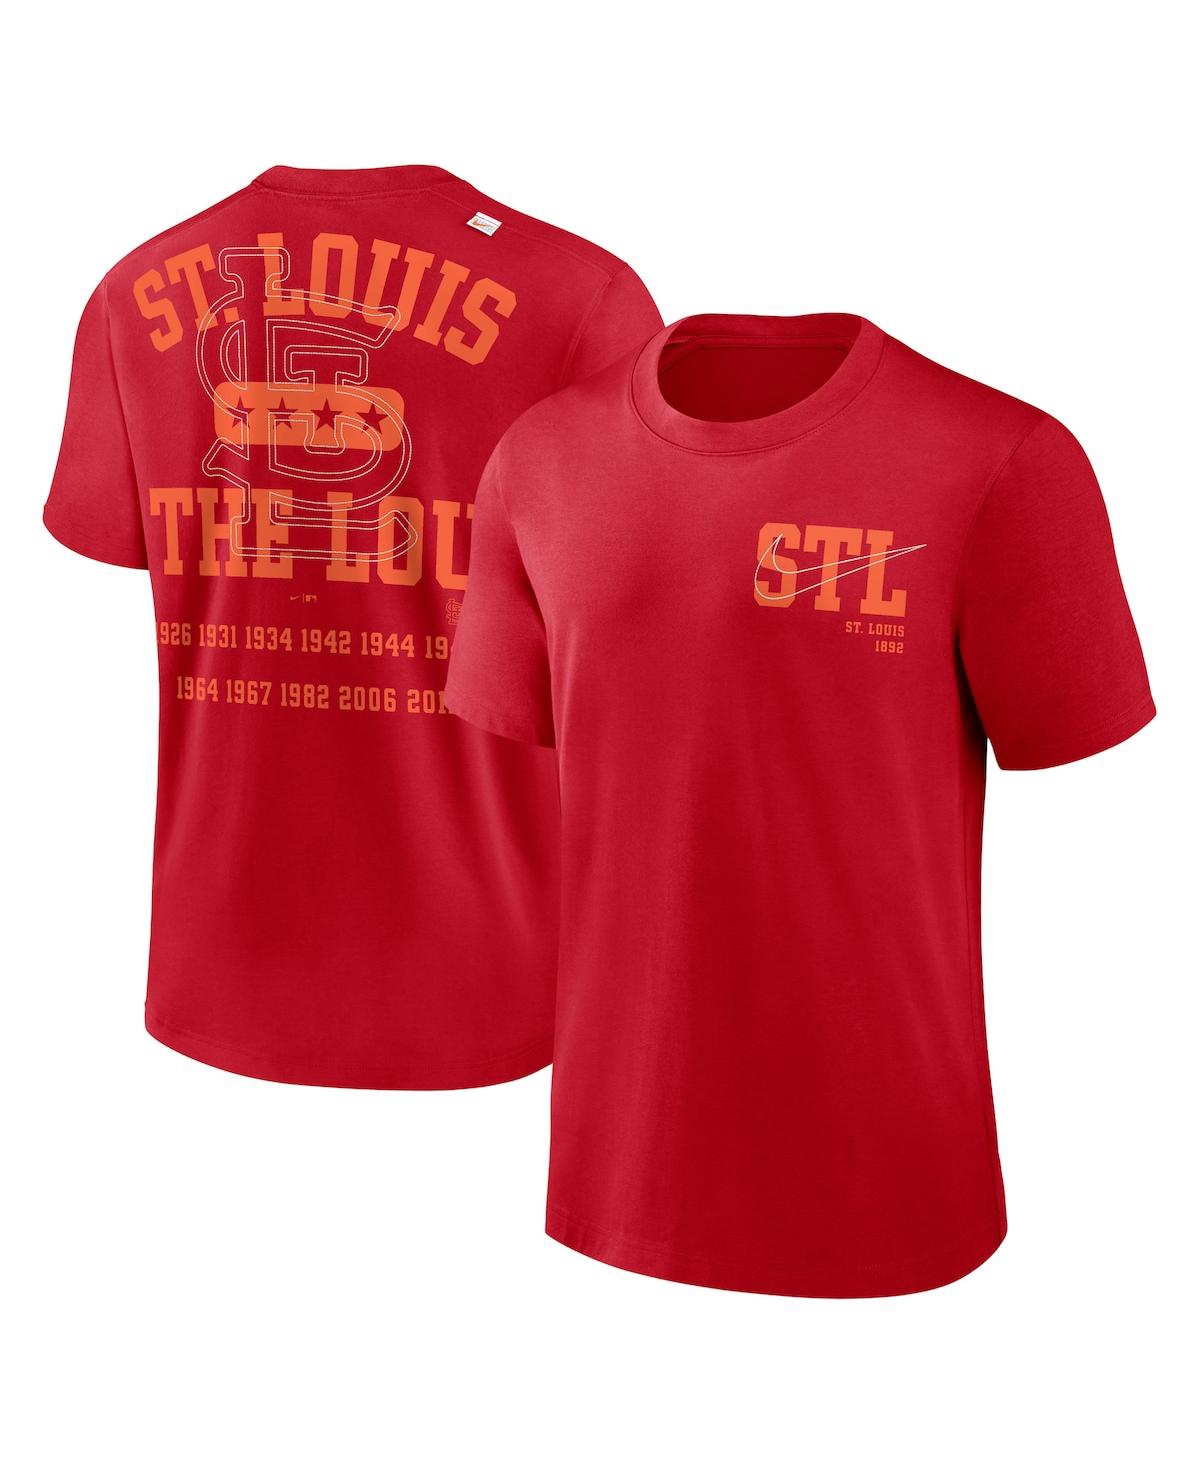 Shop Nike Men's  Red St. Louis Cardinals Statement Game Over T-shirt